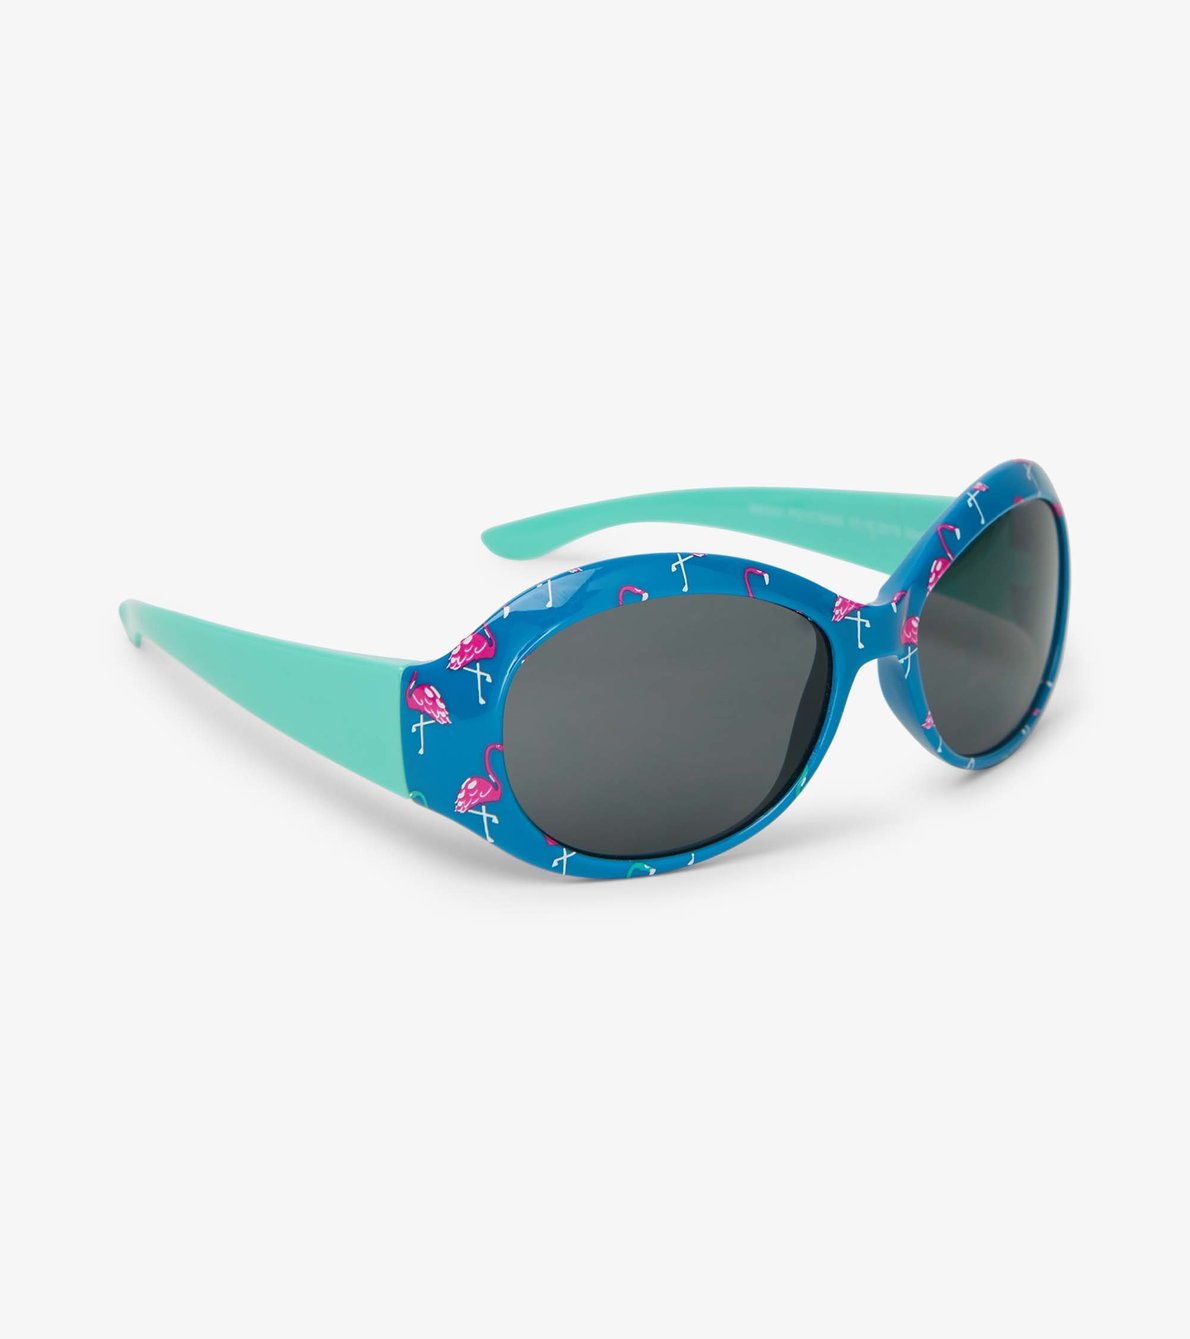 View larger image of Fancy Flamingos Sunglasses